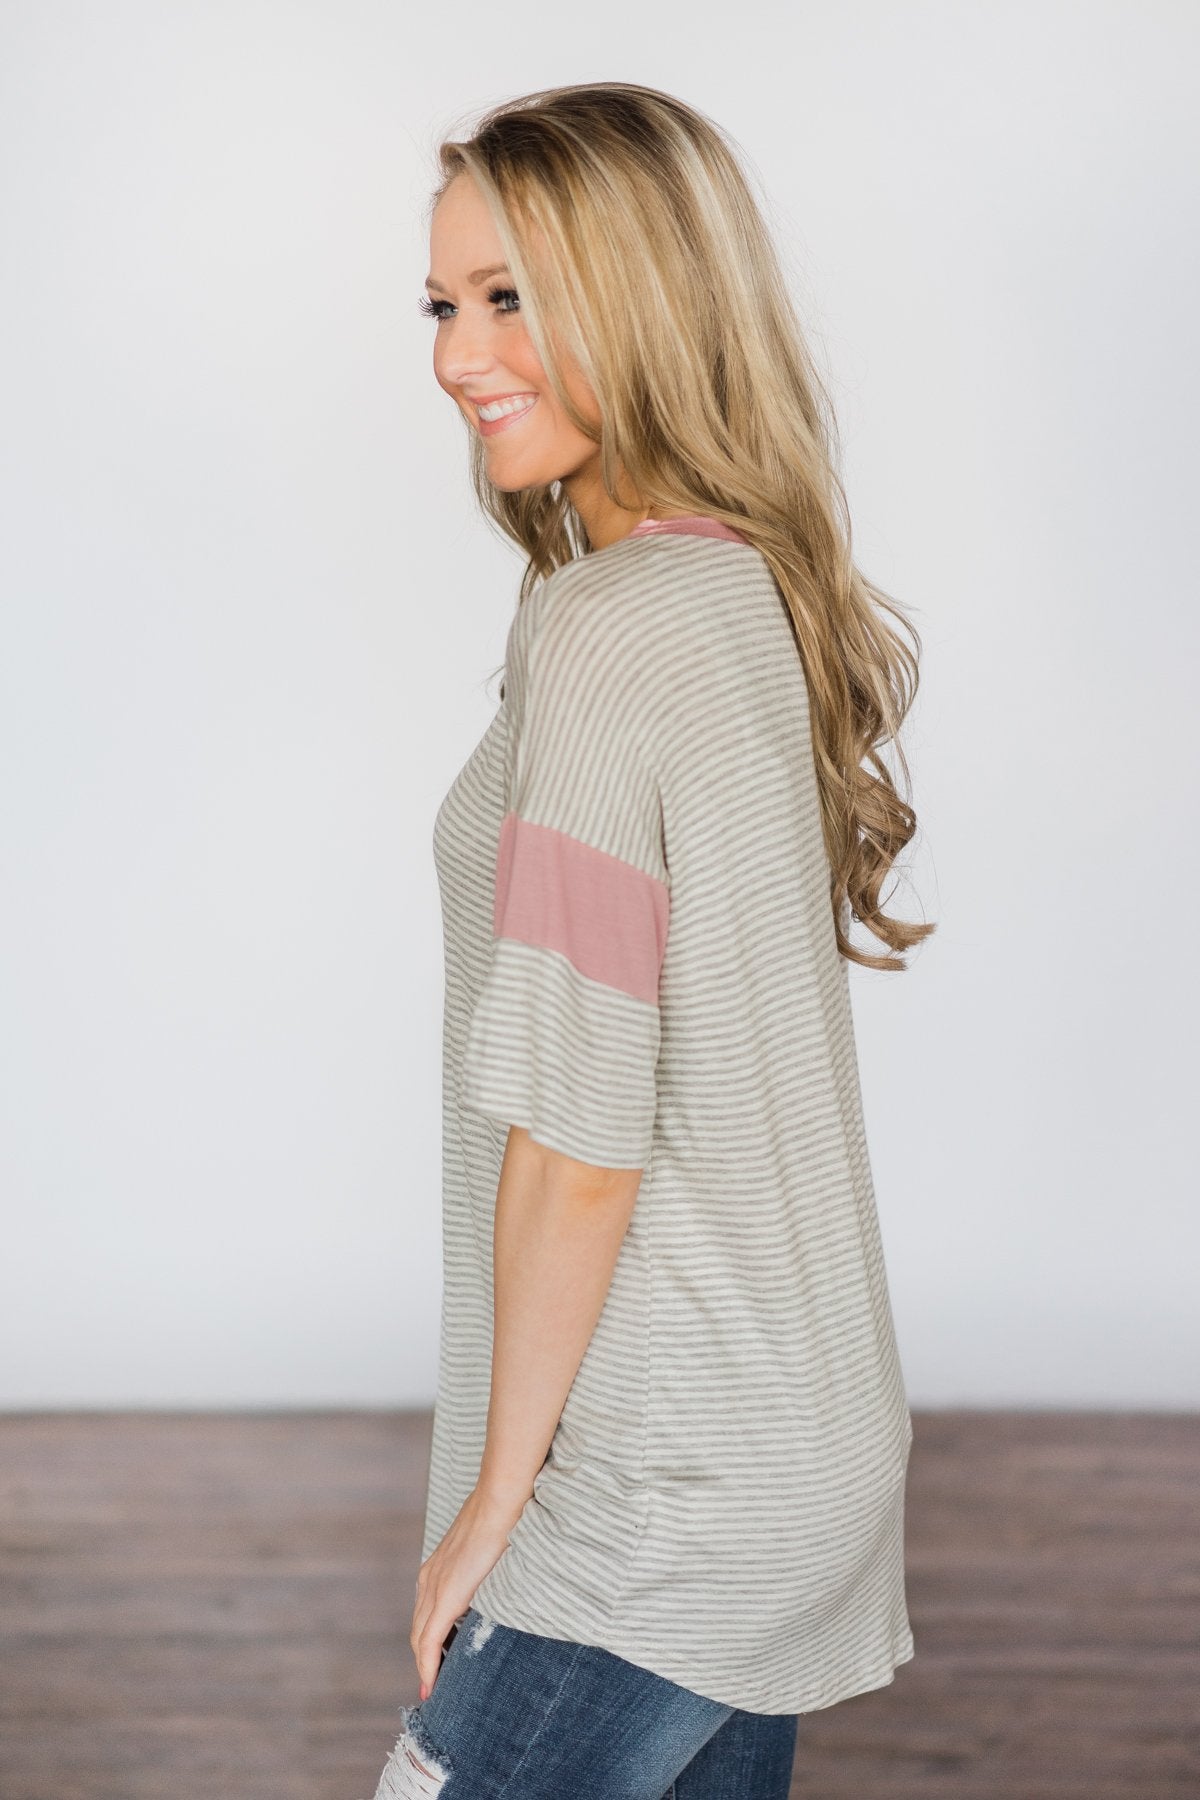 All Eyes On Me - Grey Striped Top